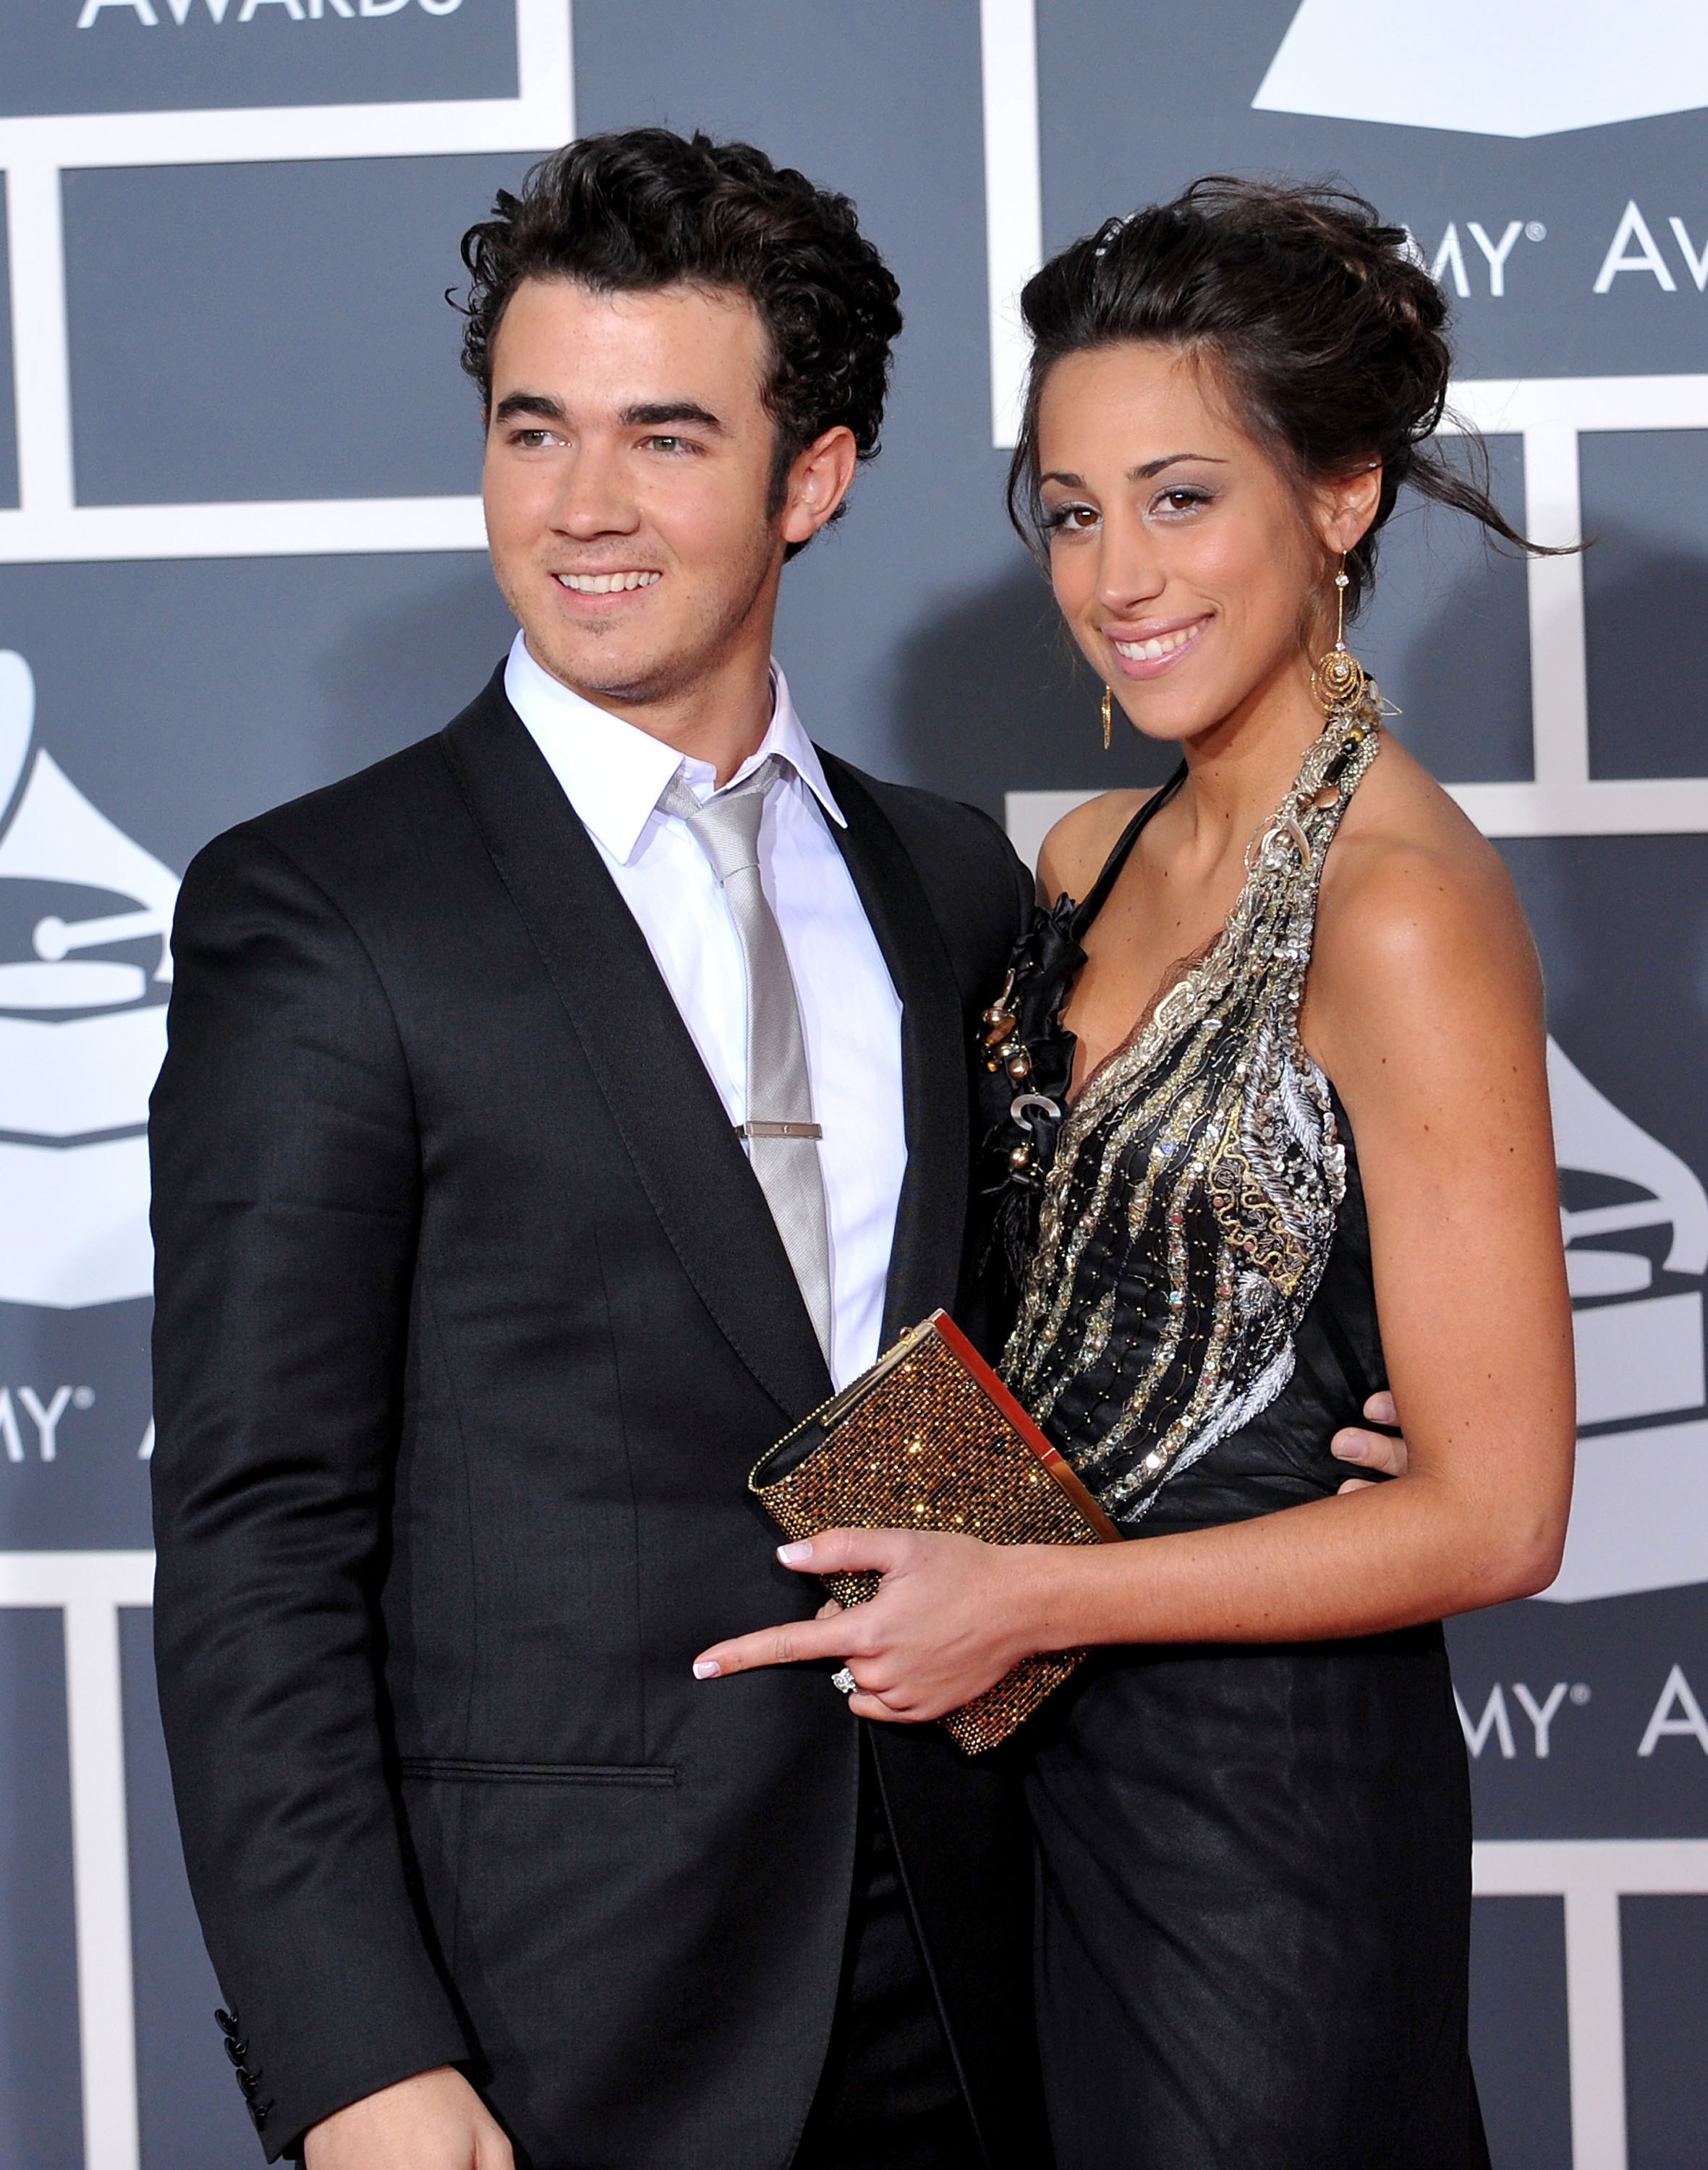 Kevin with his arm around Danielle&#x27;s waist